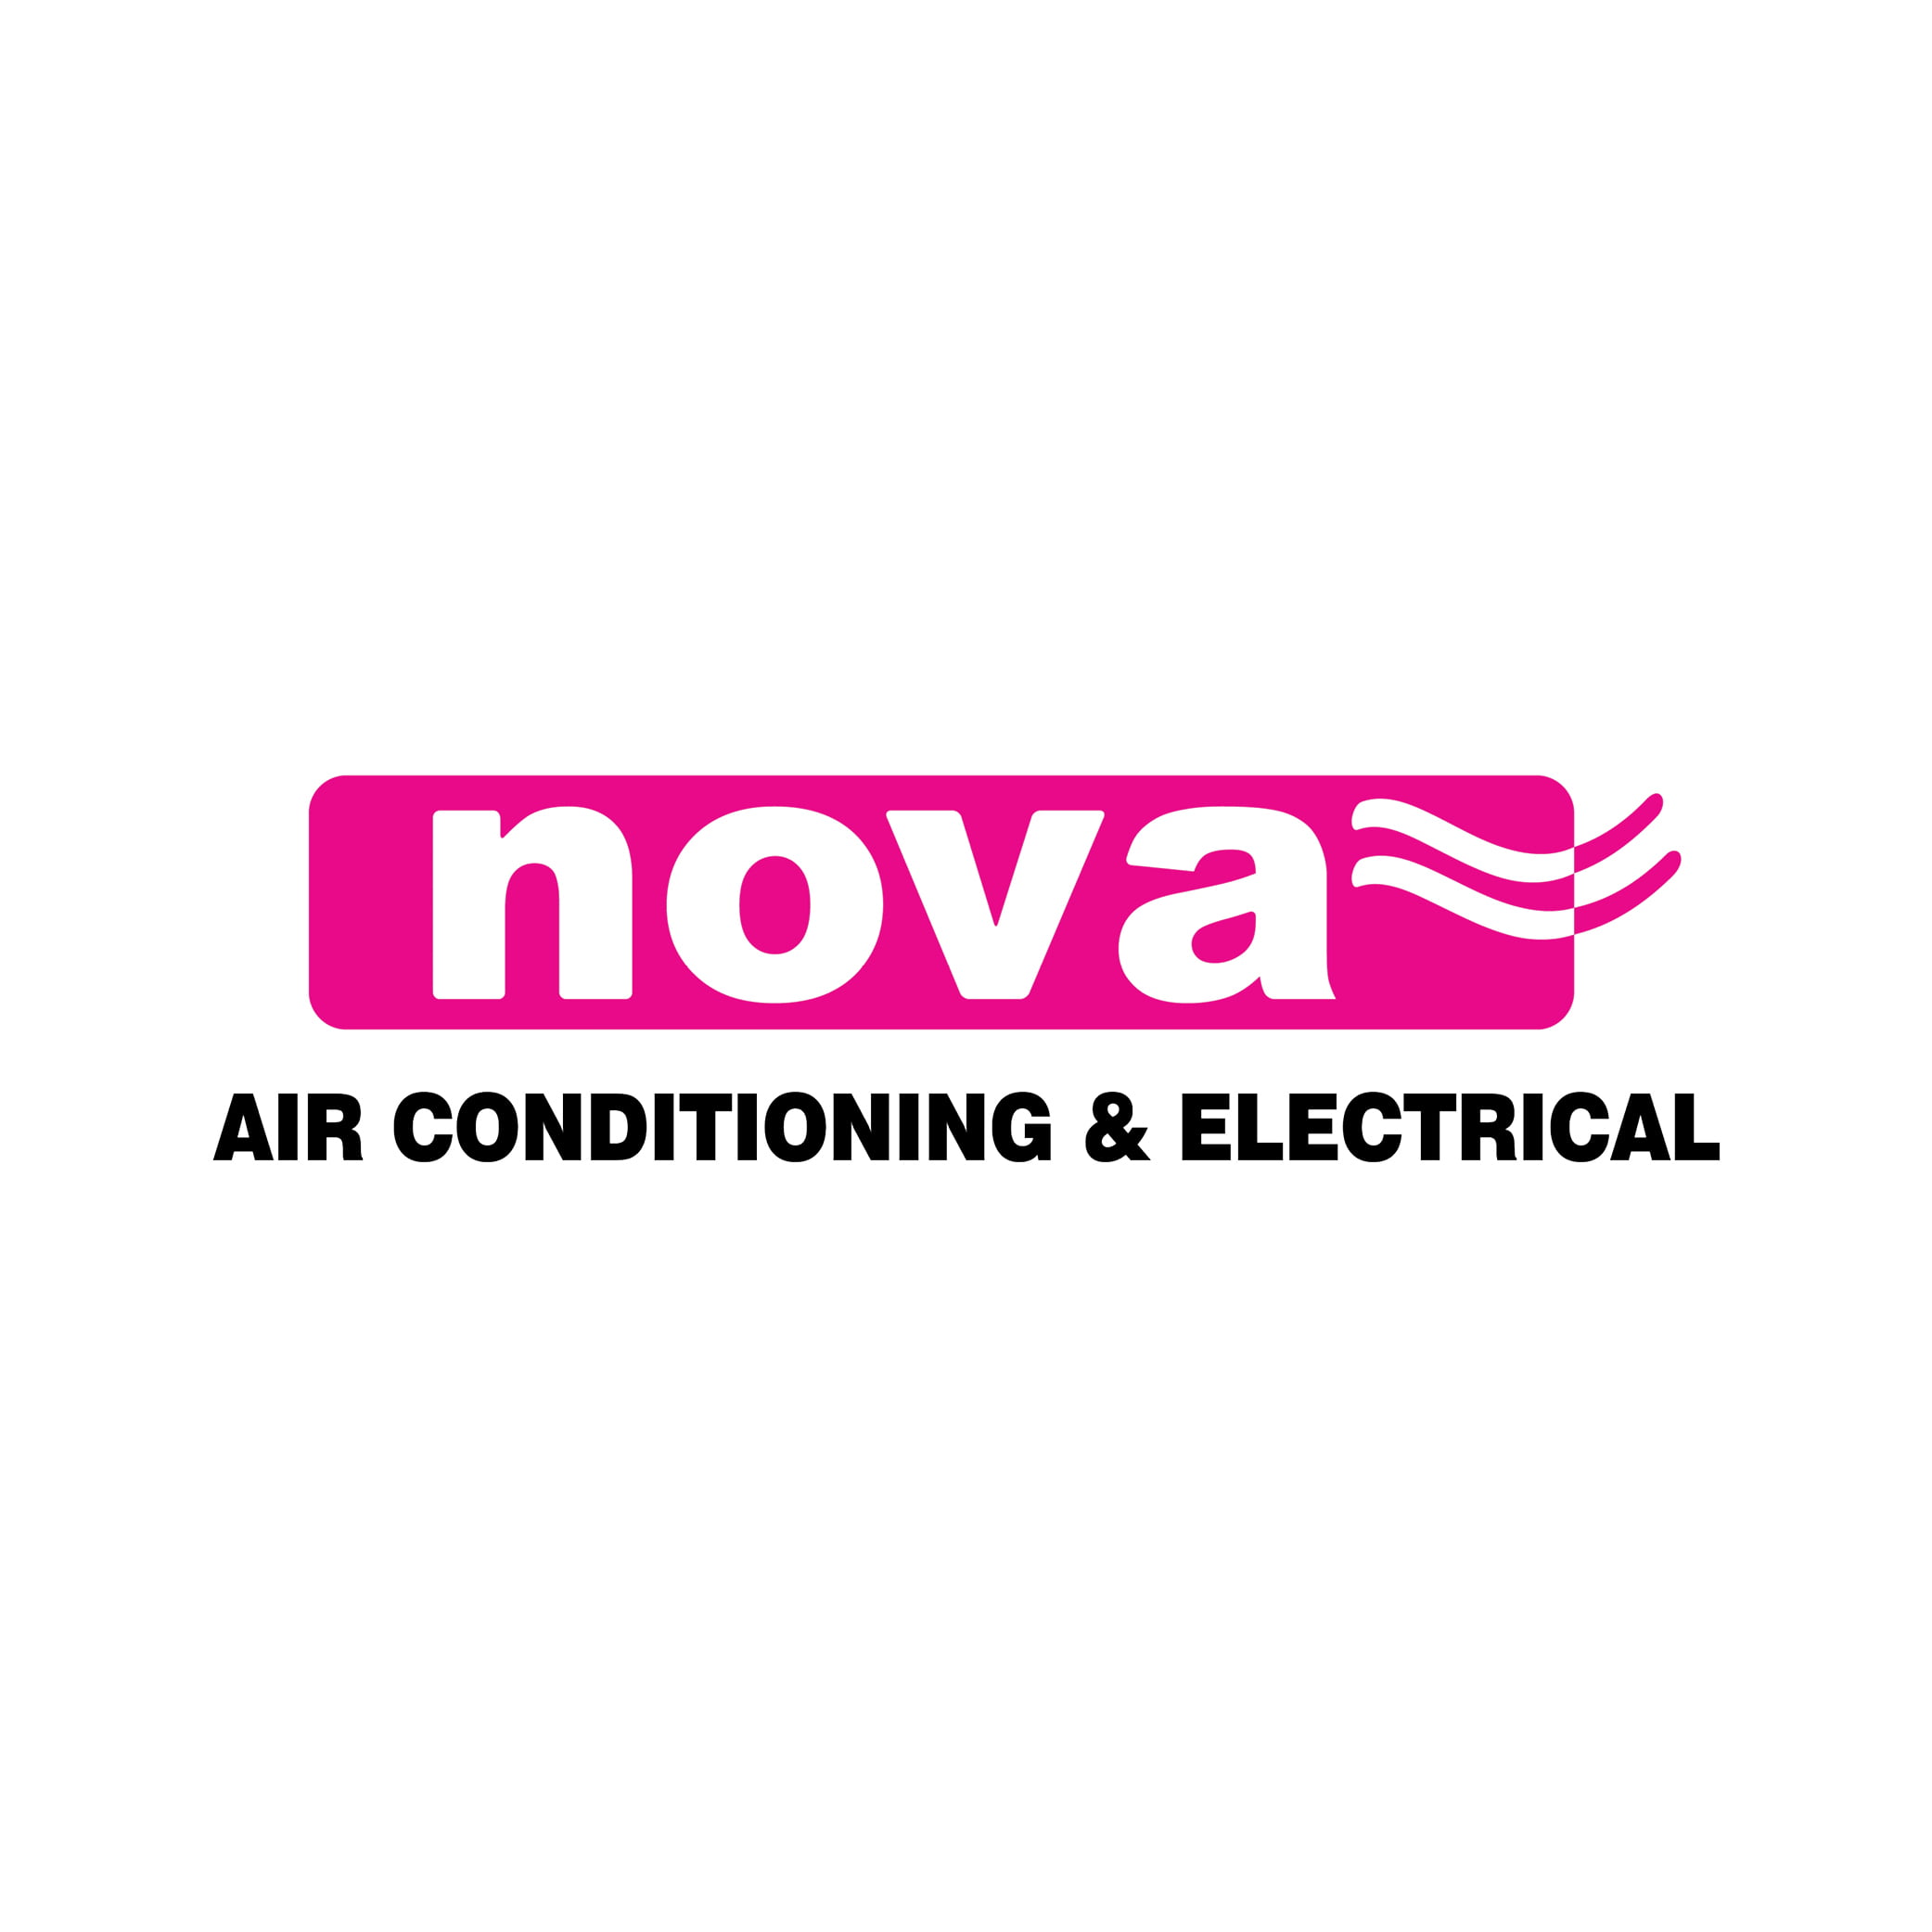 Nova Air Conditioning & Electrical